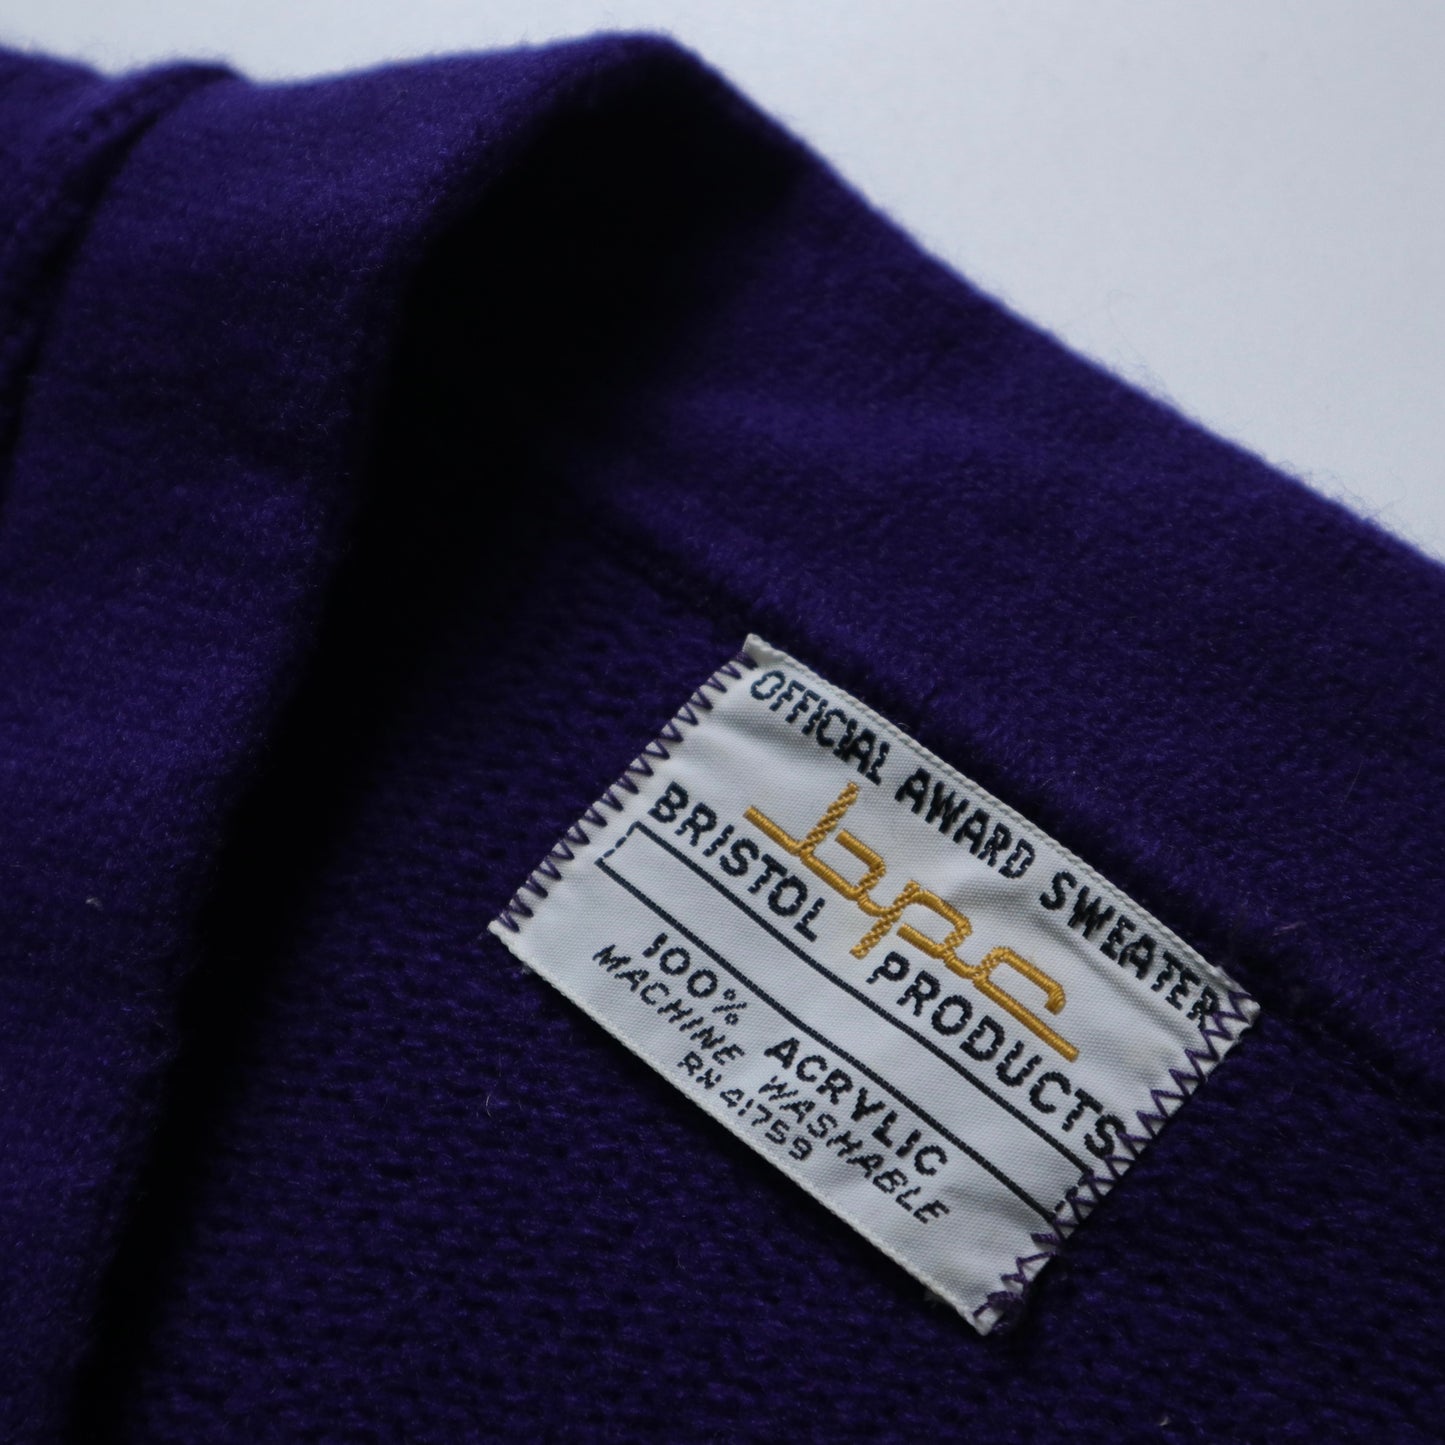 1970s Varsity Sweater patch “T” purple V-neck campus sweater